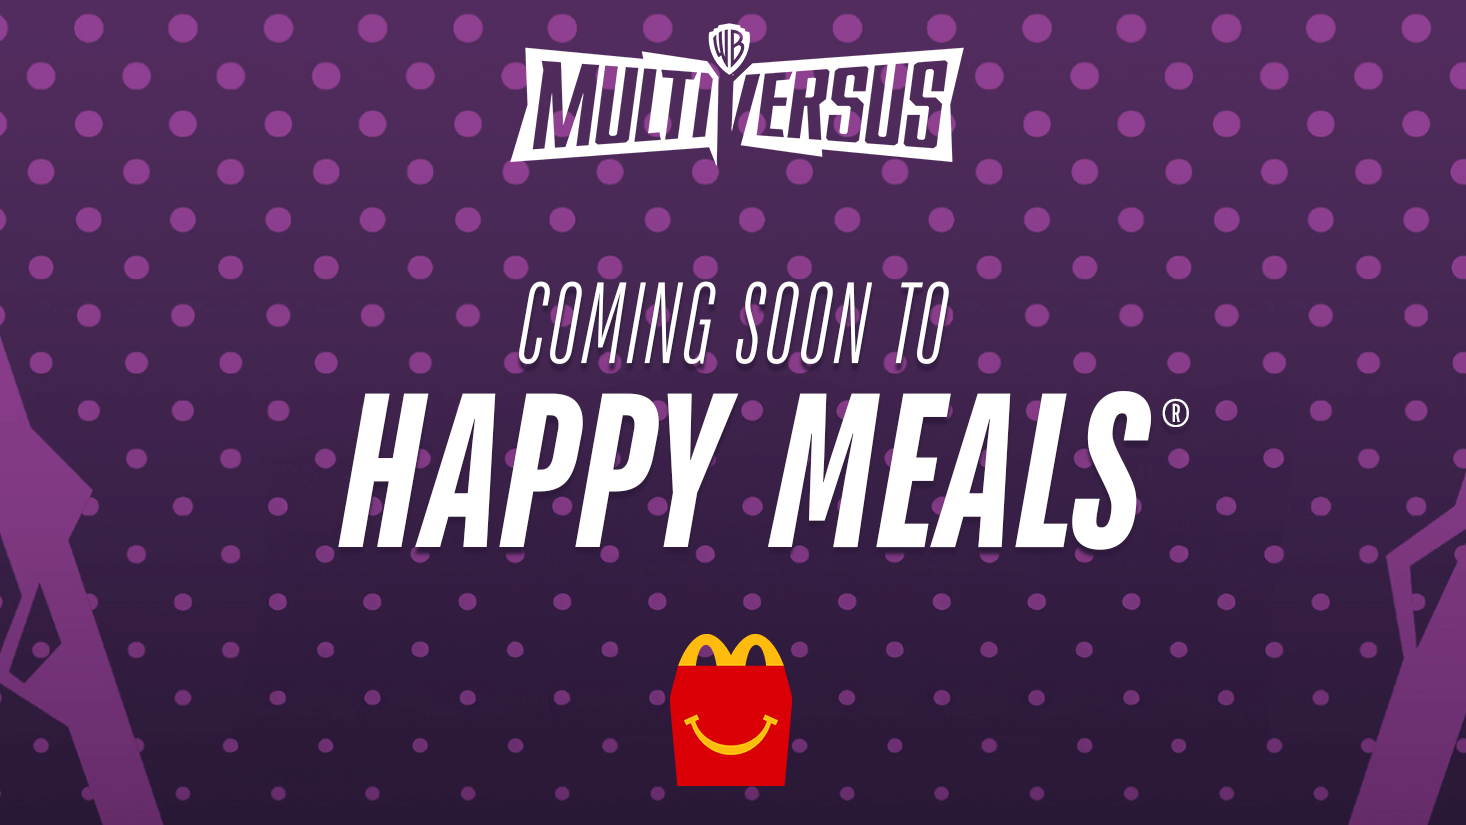 MultiVersus Teases Promotion With McDonald's